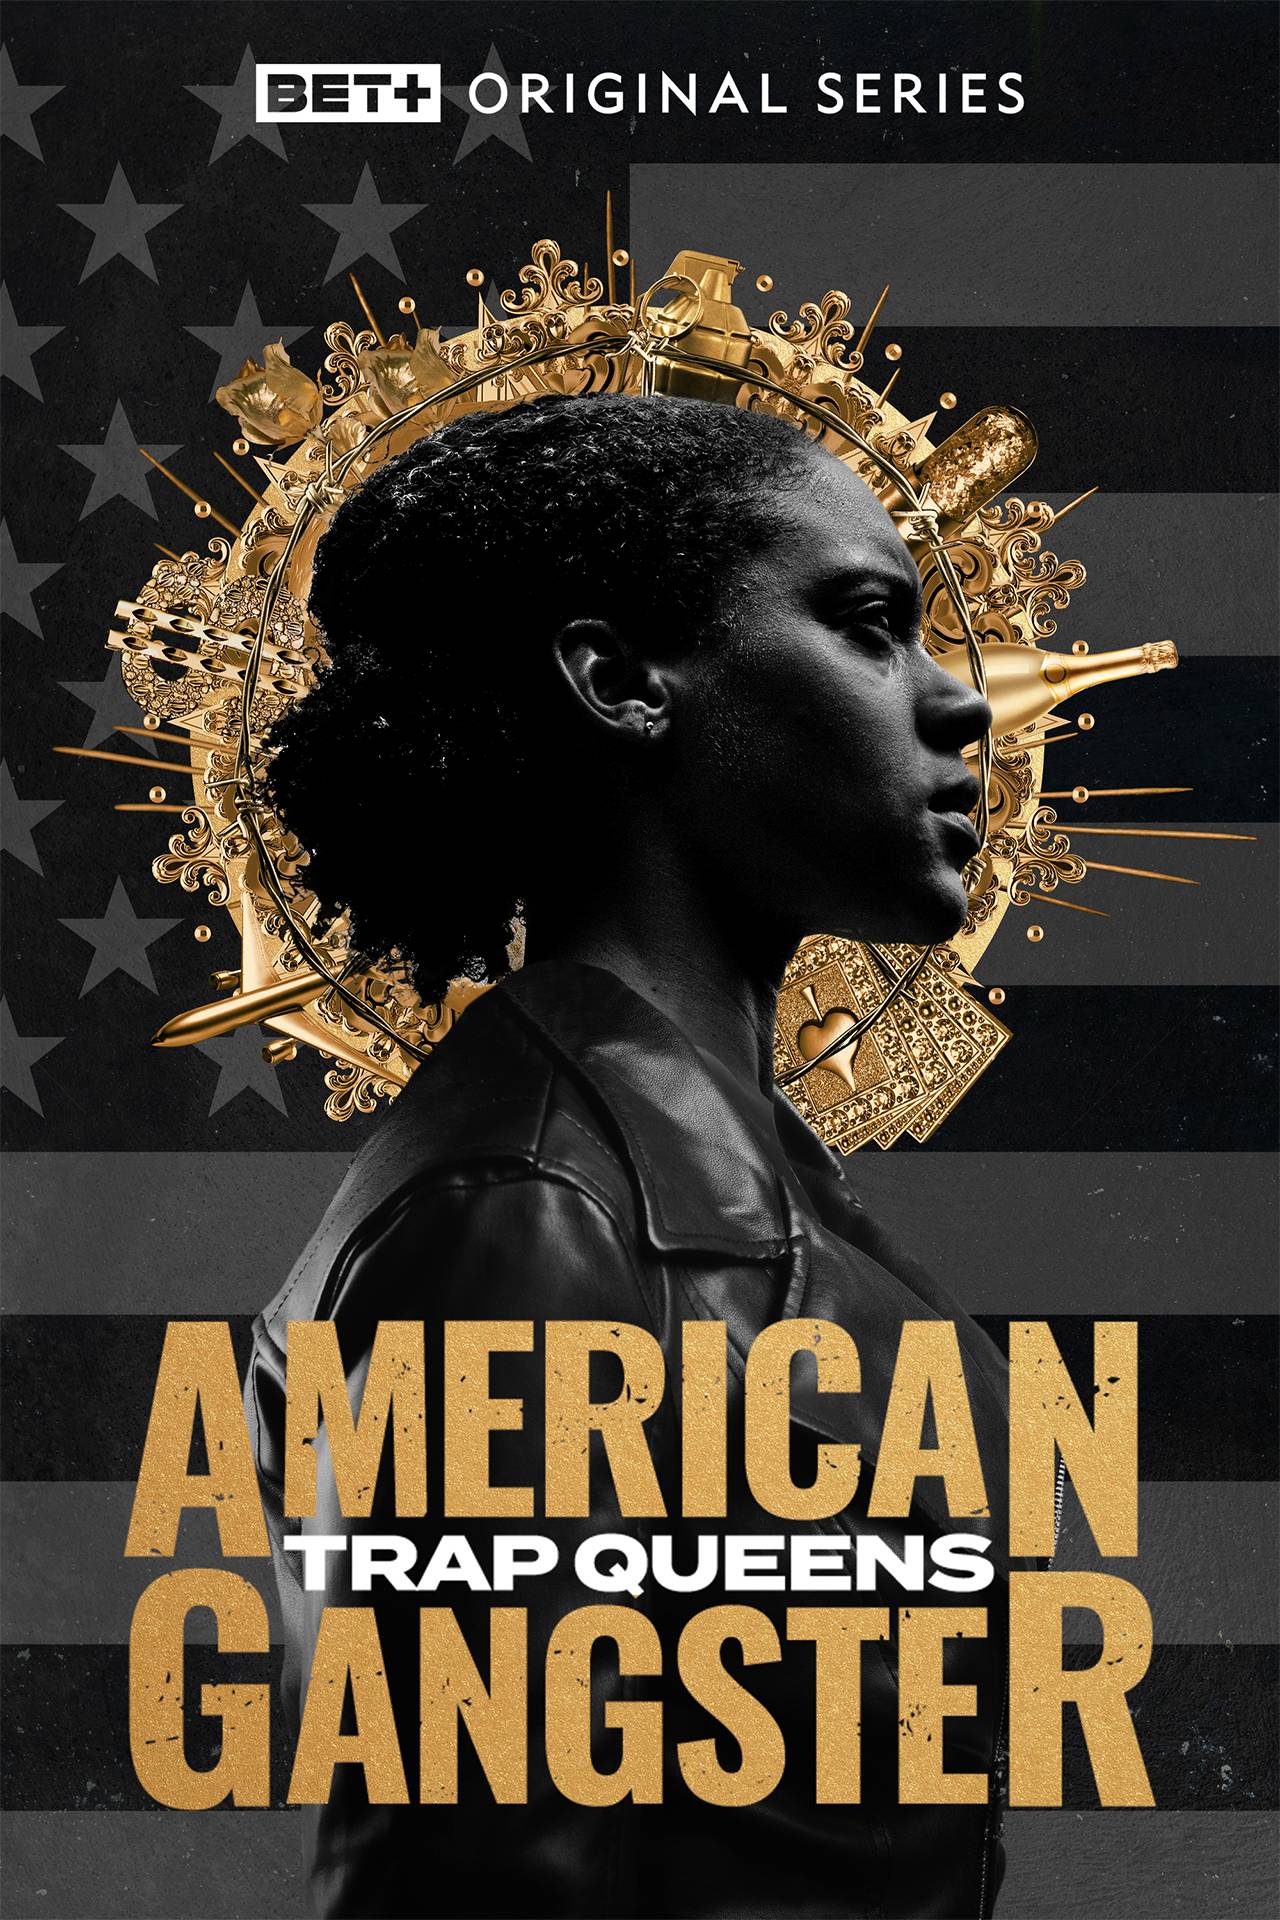 TV ratings for American Gangster: Trap Queens in Denmark. bet+ TV series